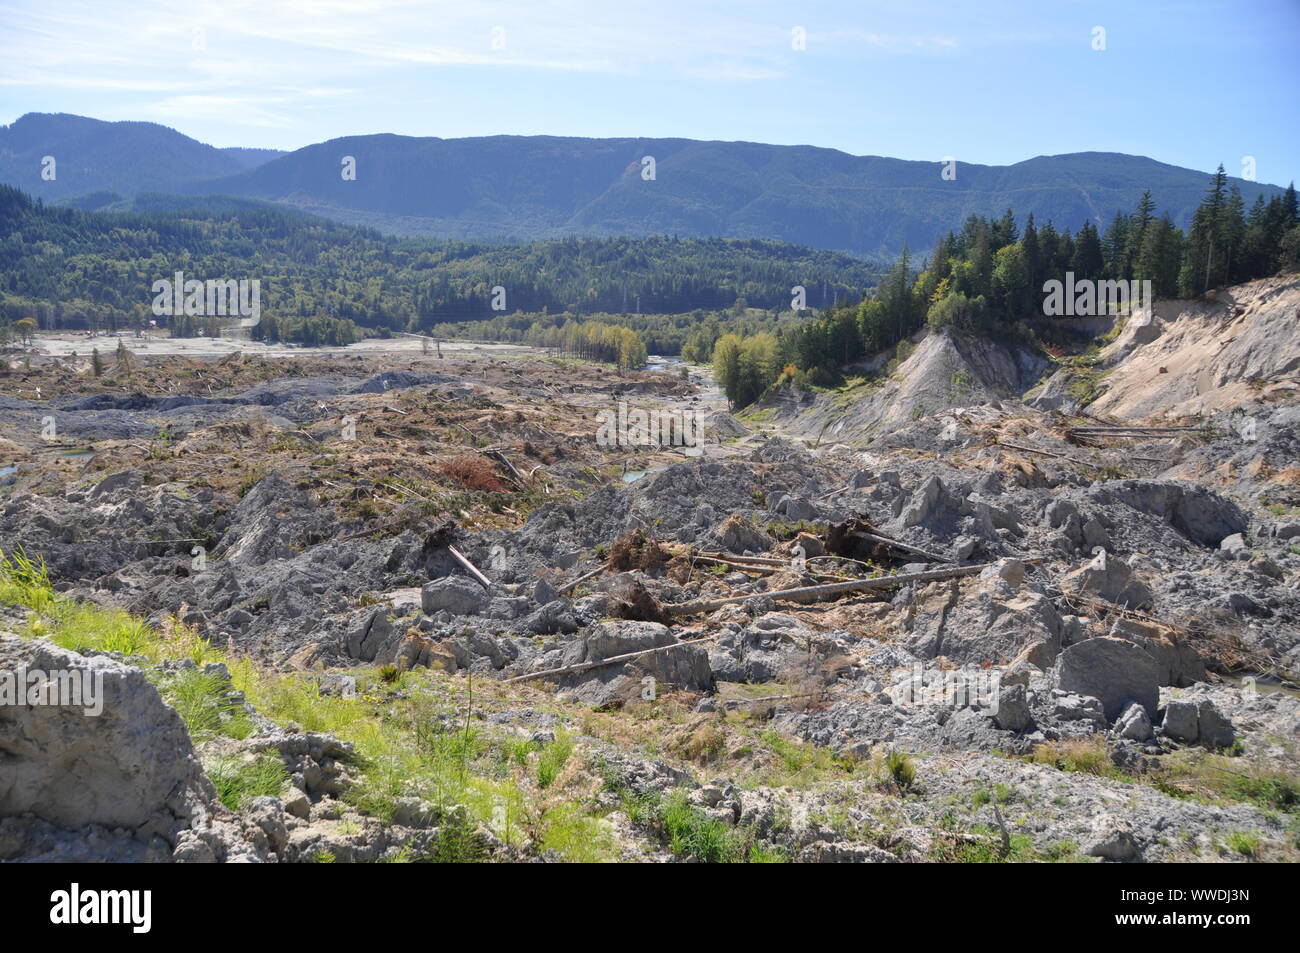 The lower portion of the deadly 2014 Oso Landslide, Oso Landslide, North Fork Stillaguamish River Valley, Snohomish County, Washington, USA Stock Photo